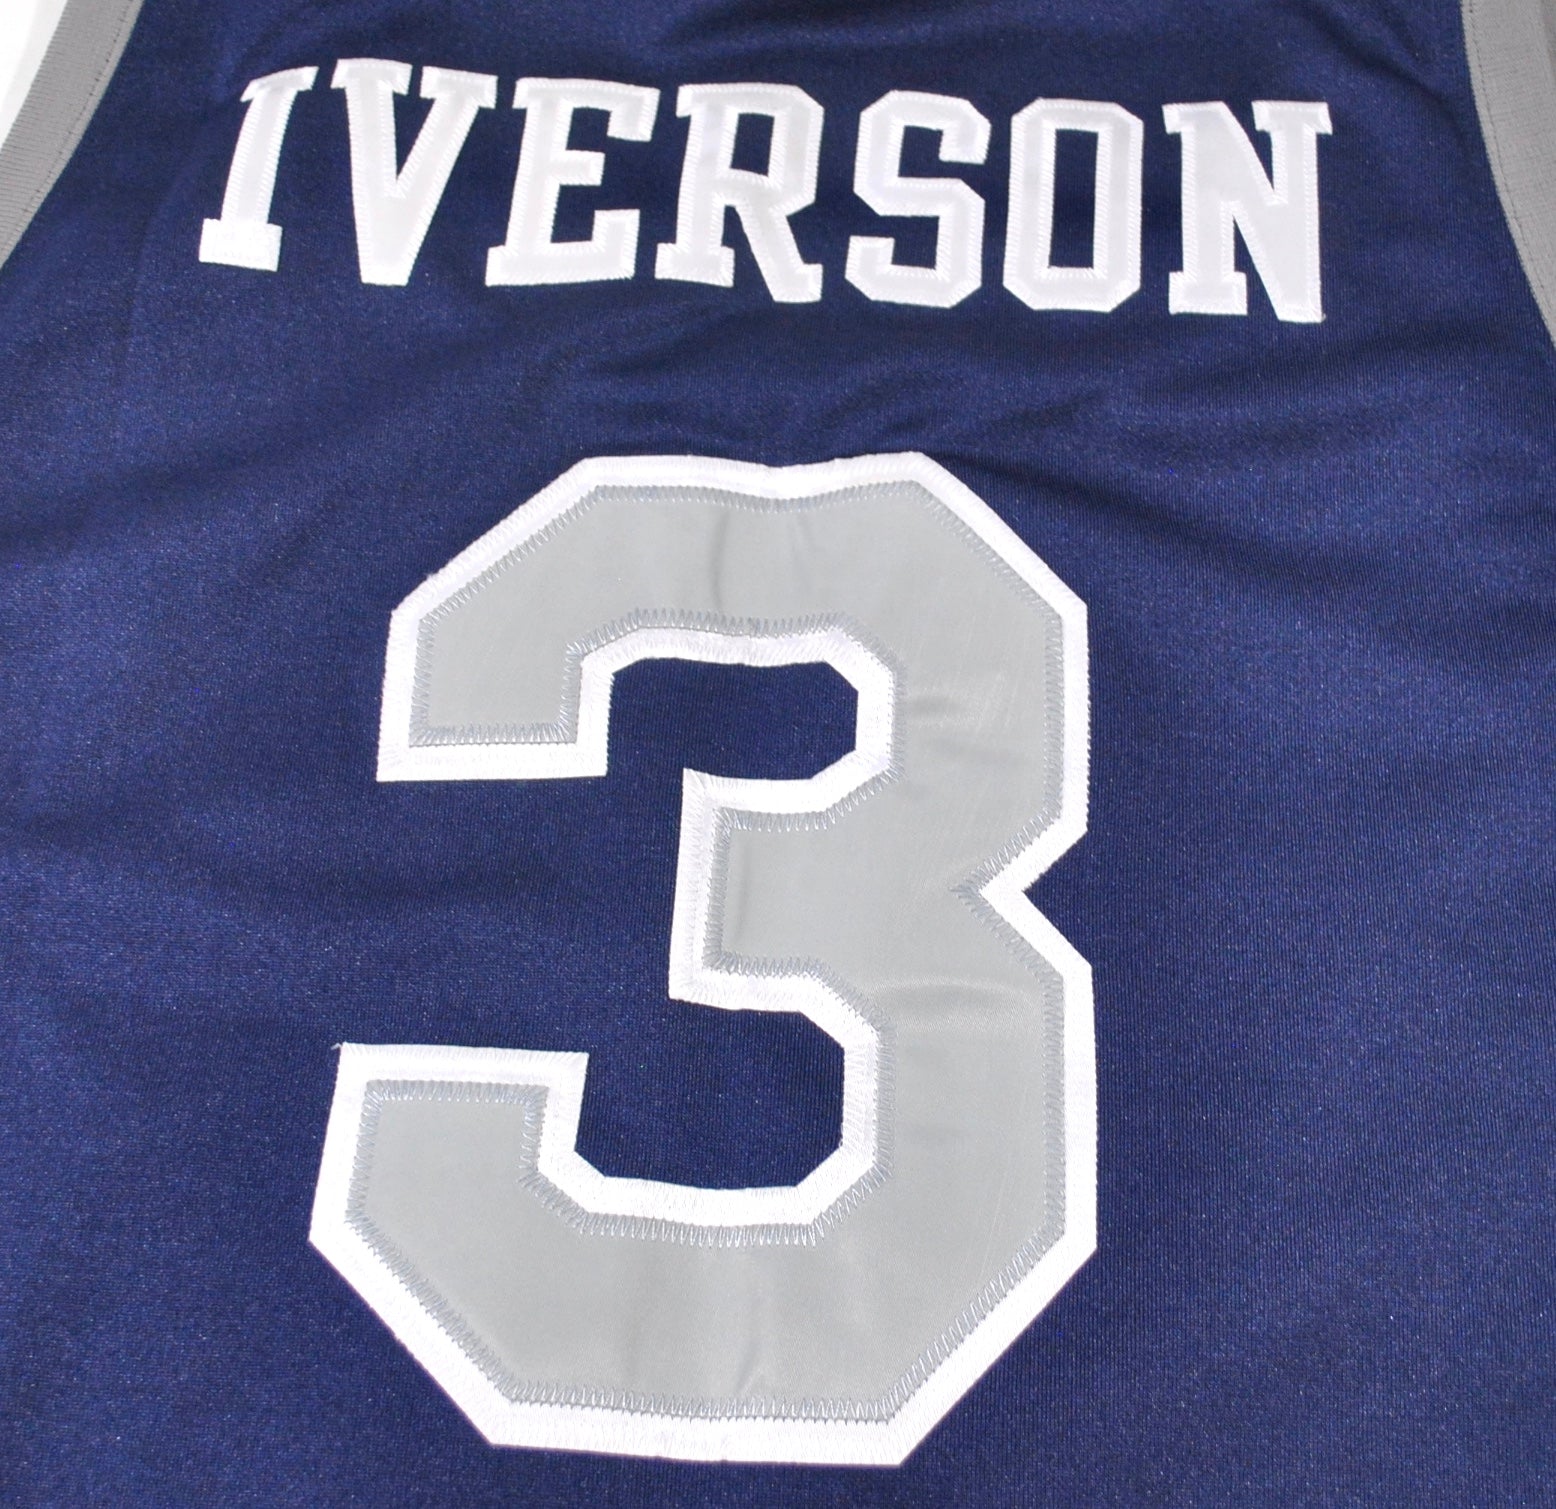 gucci iverson jersey, Off 60%